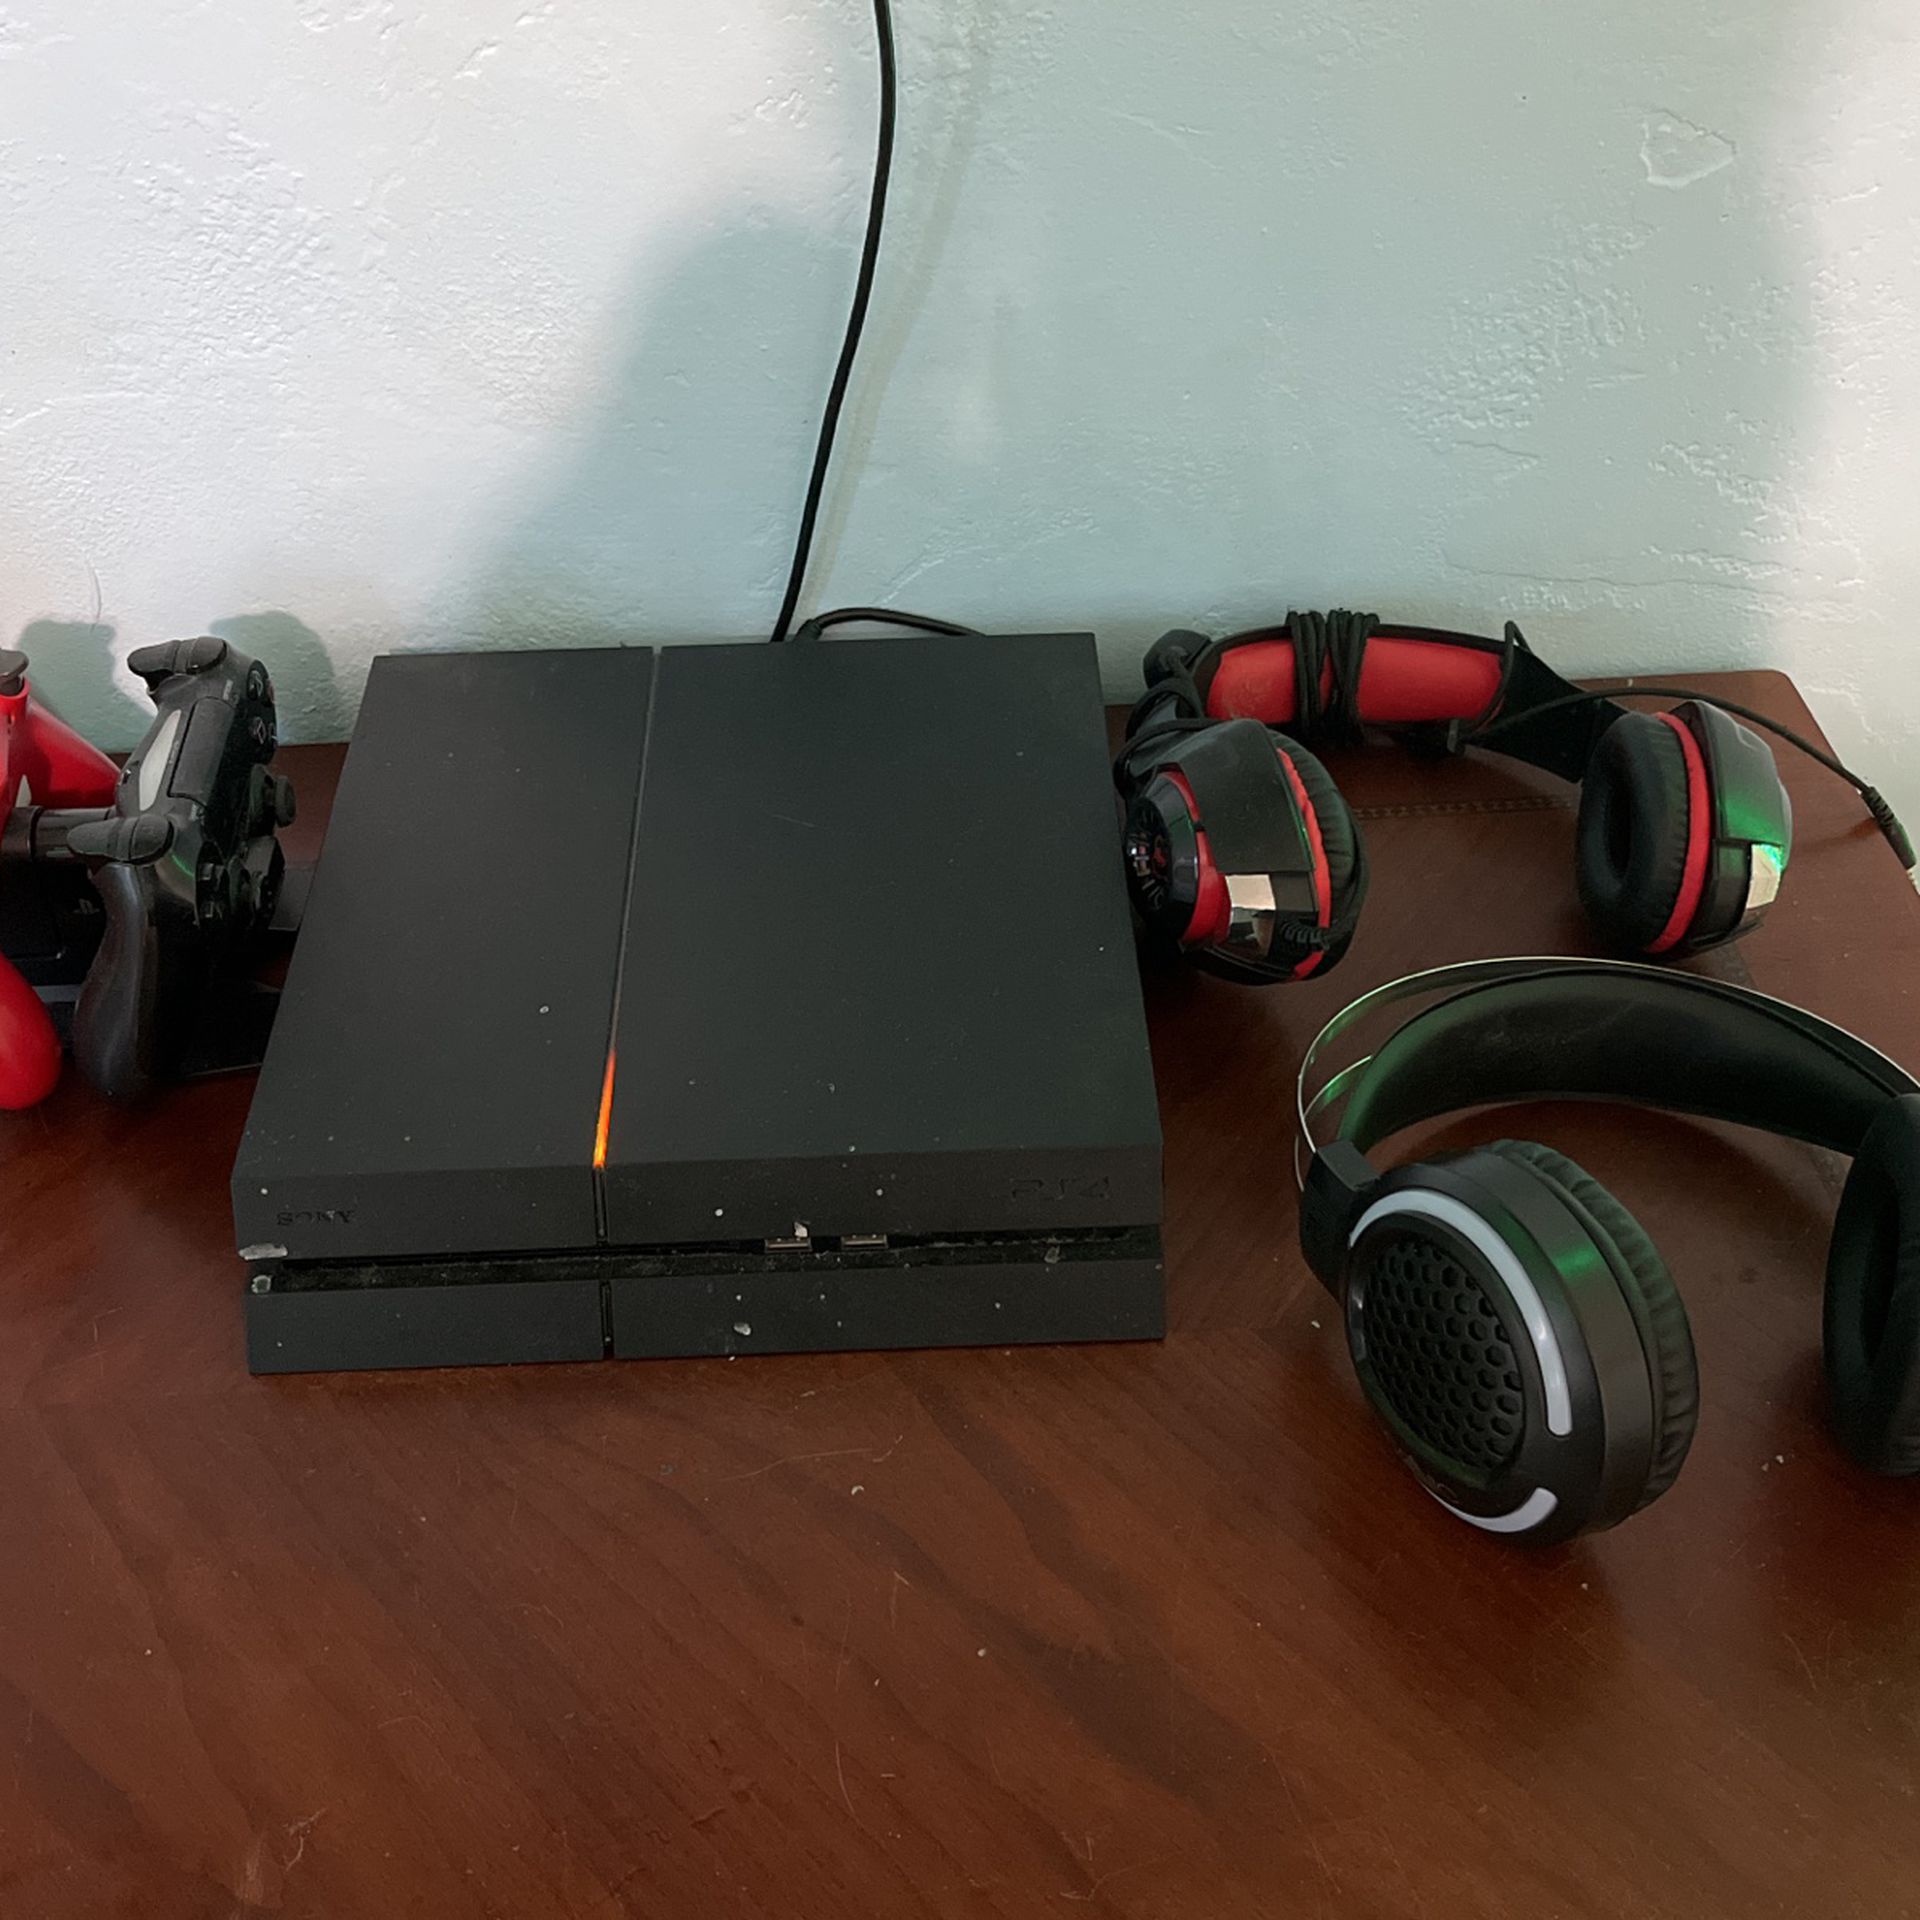 Ps4 Slim And 3 Controllers Plus 1 Wired Headphones And A Controller Charging Station